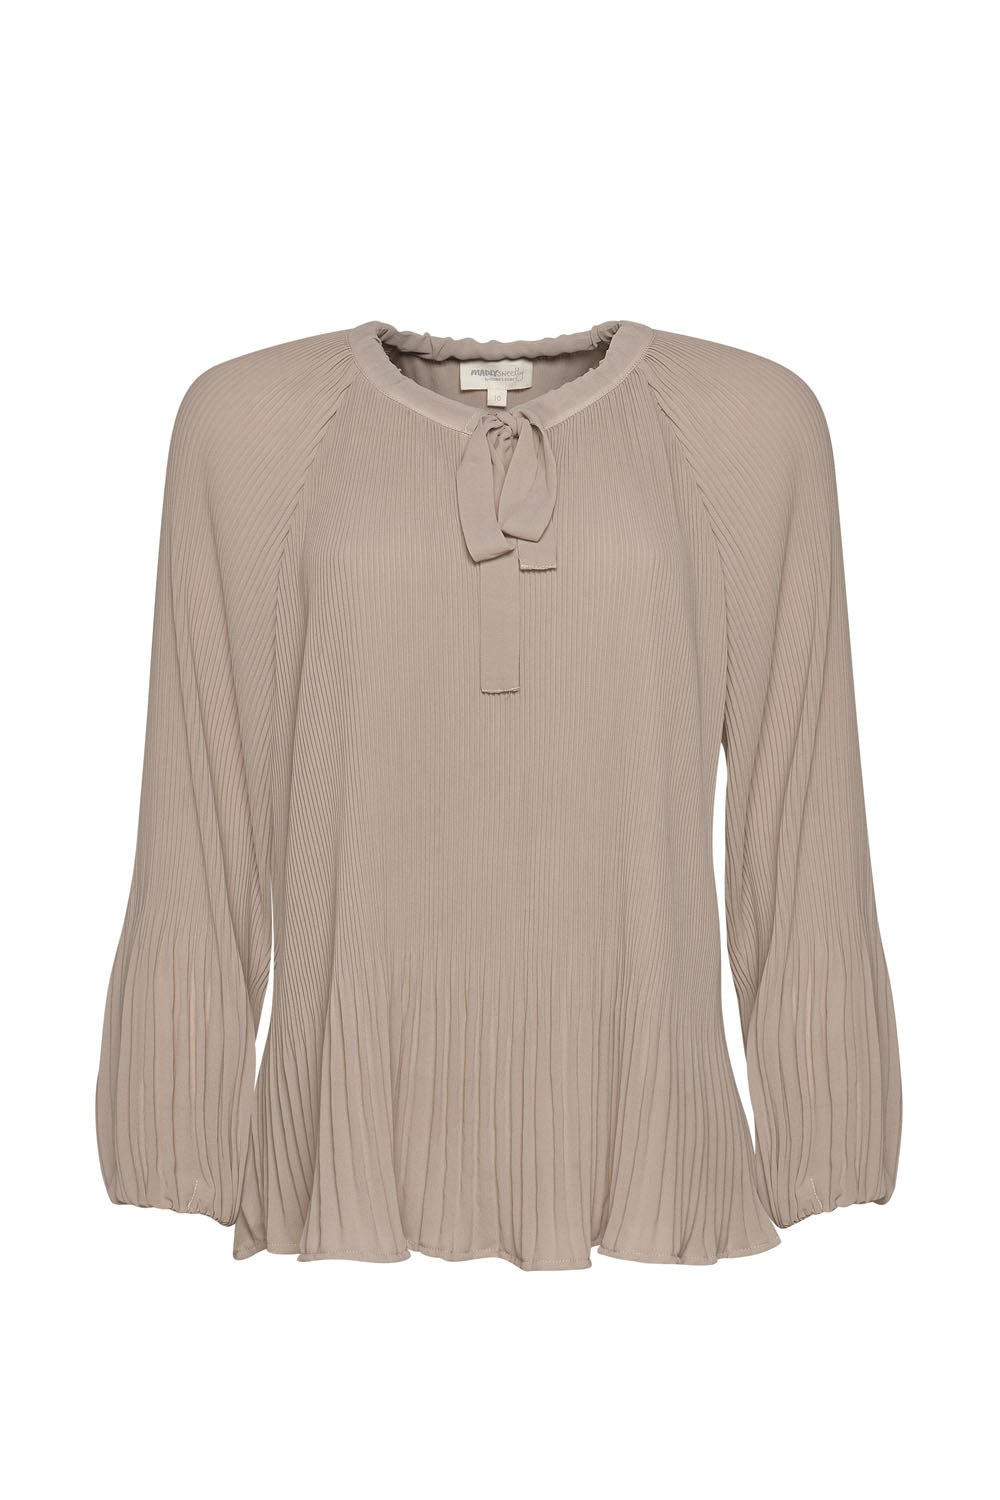 Madly Sweetly Just Pleat It Top - Taupe